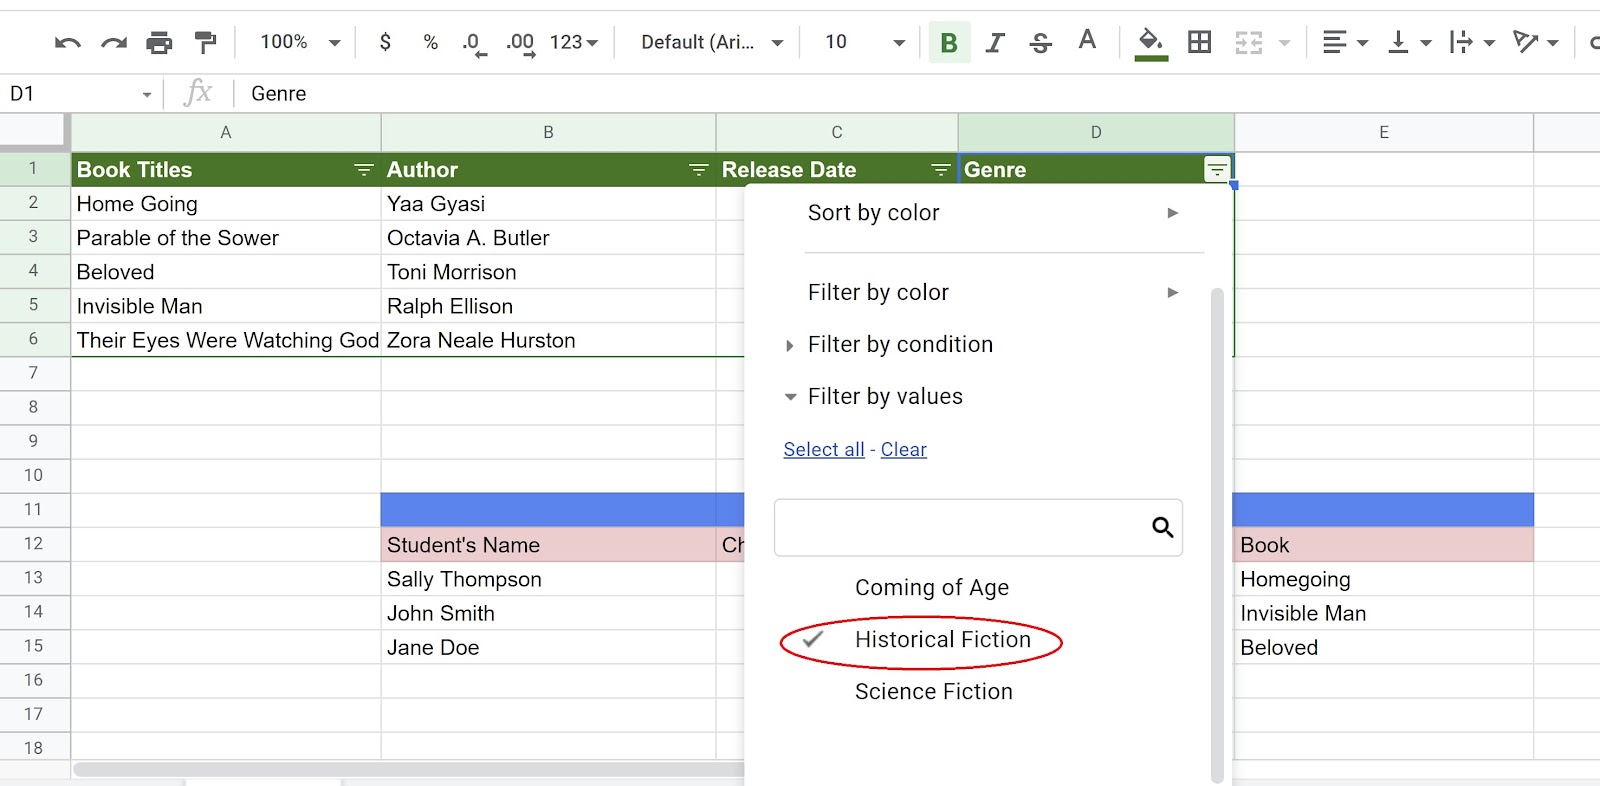 Historical Fiction data value is selected while other values are de-selected in Google Sheets